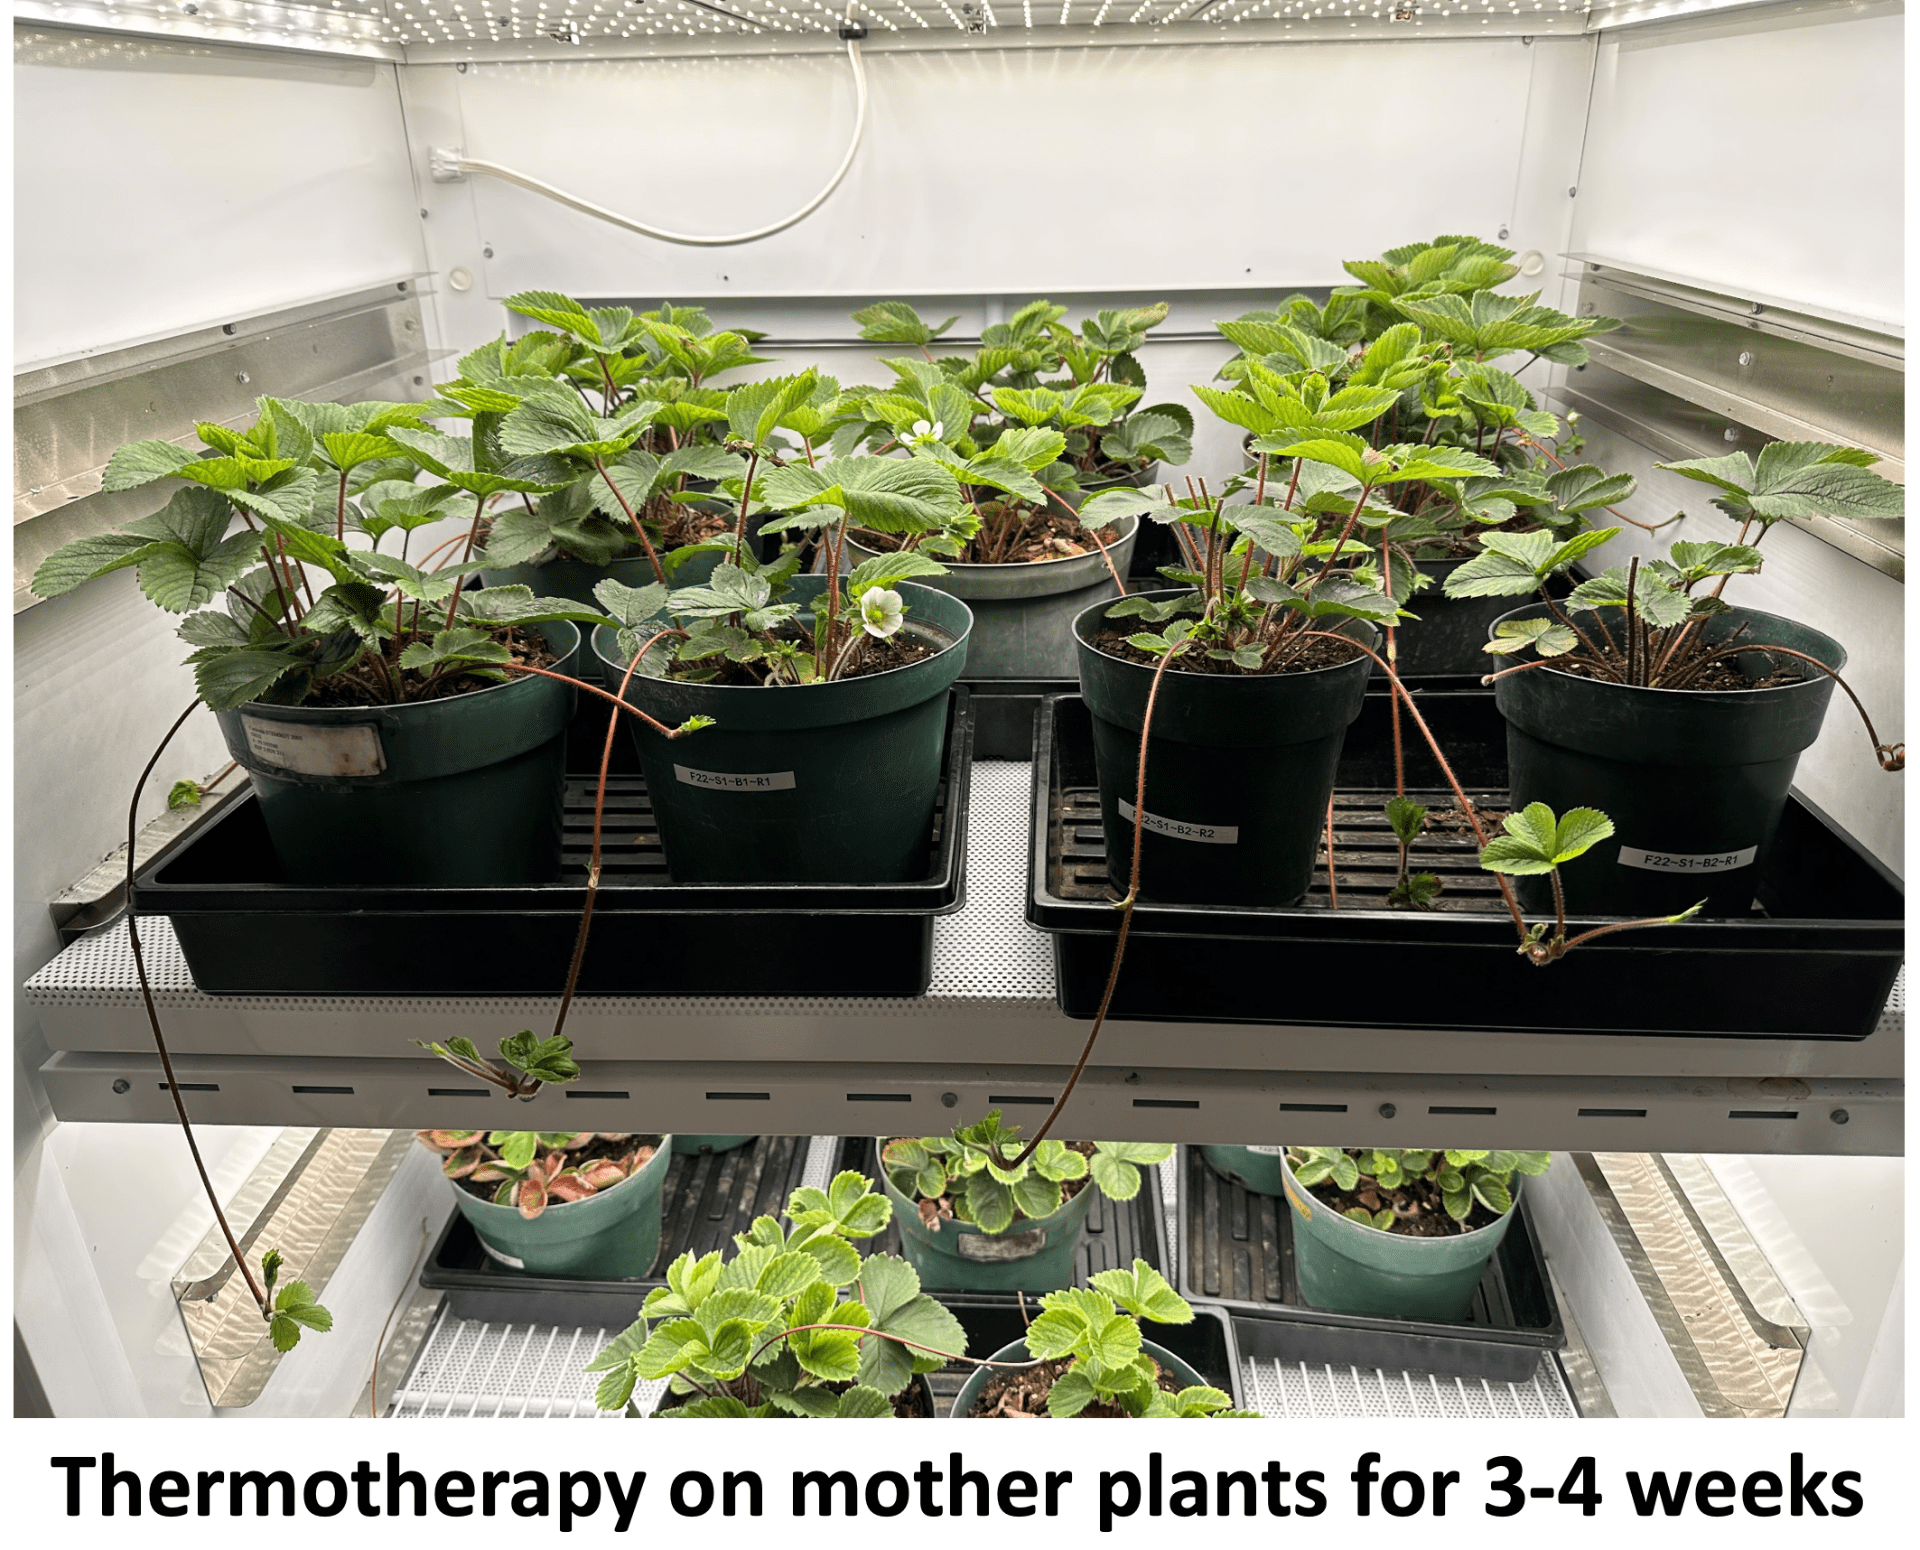 Thermotherapy on mother plants for 3-4 weeks